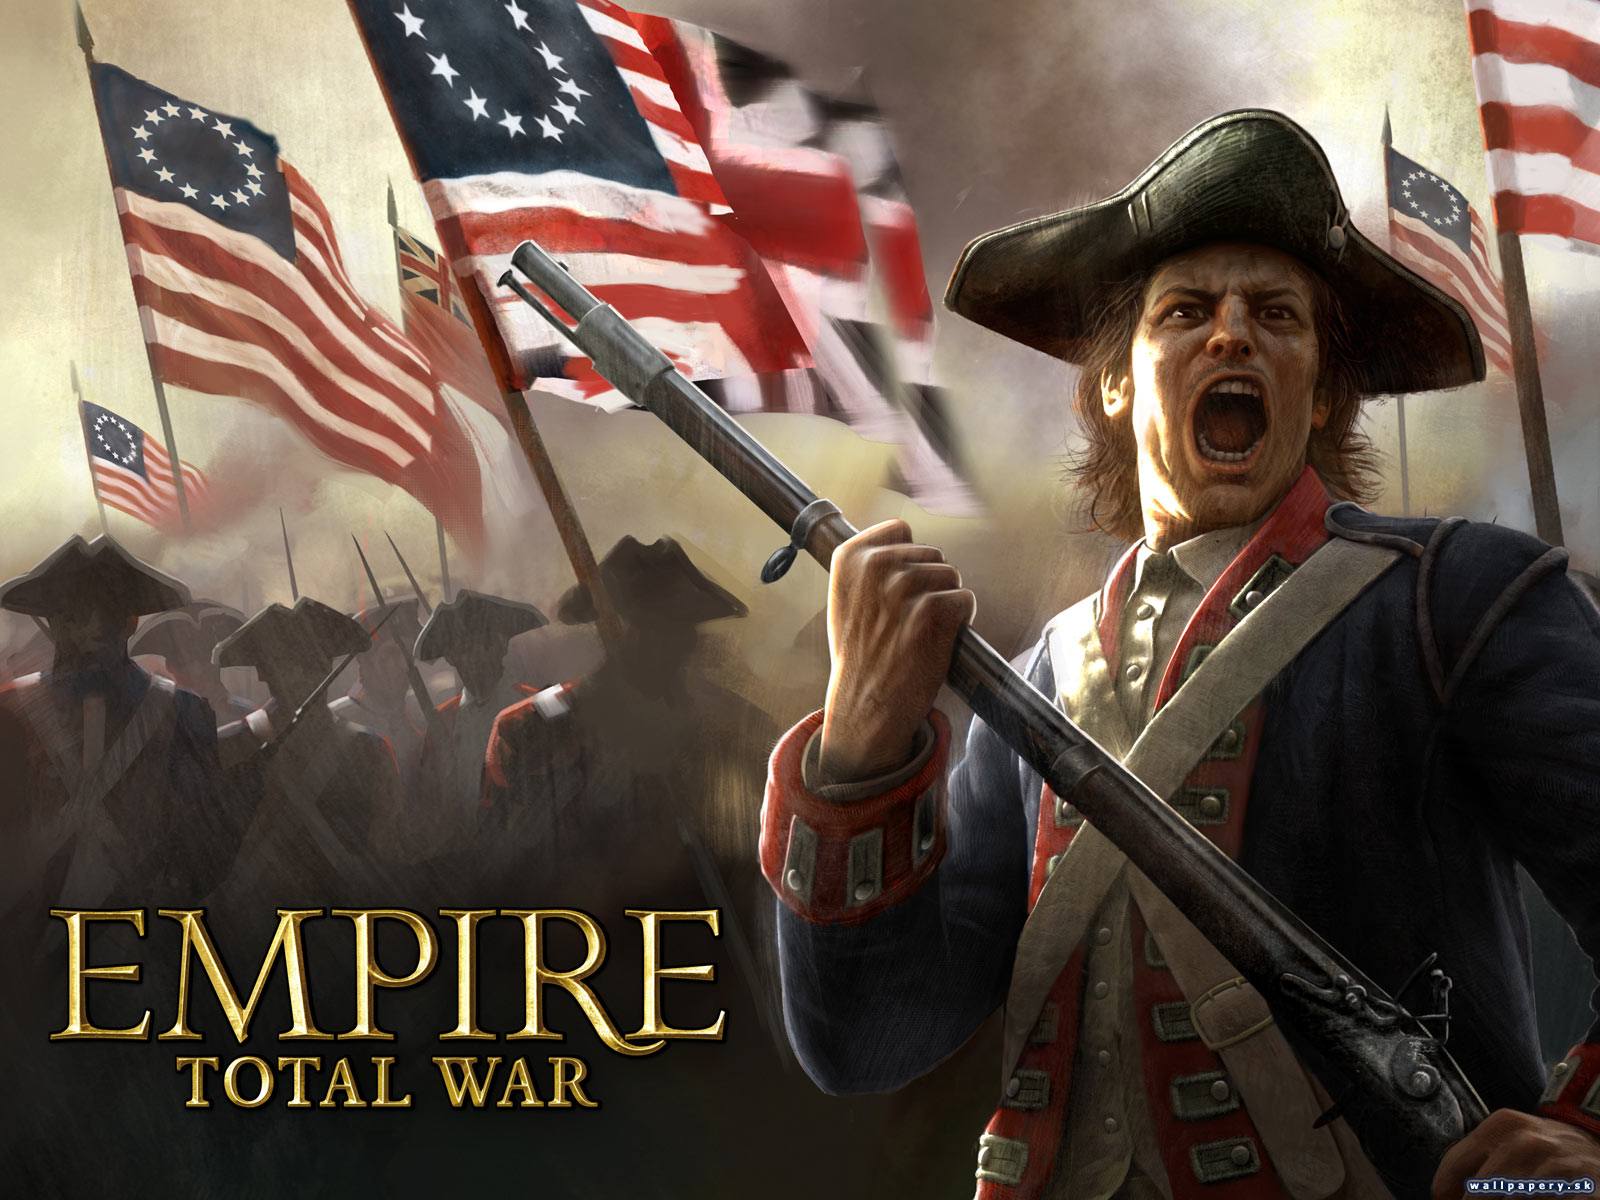 empire total war wallpaper,rebellion,movie,event,veterans day,independence day